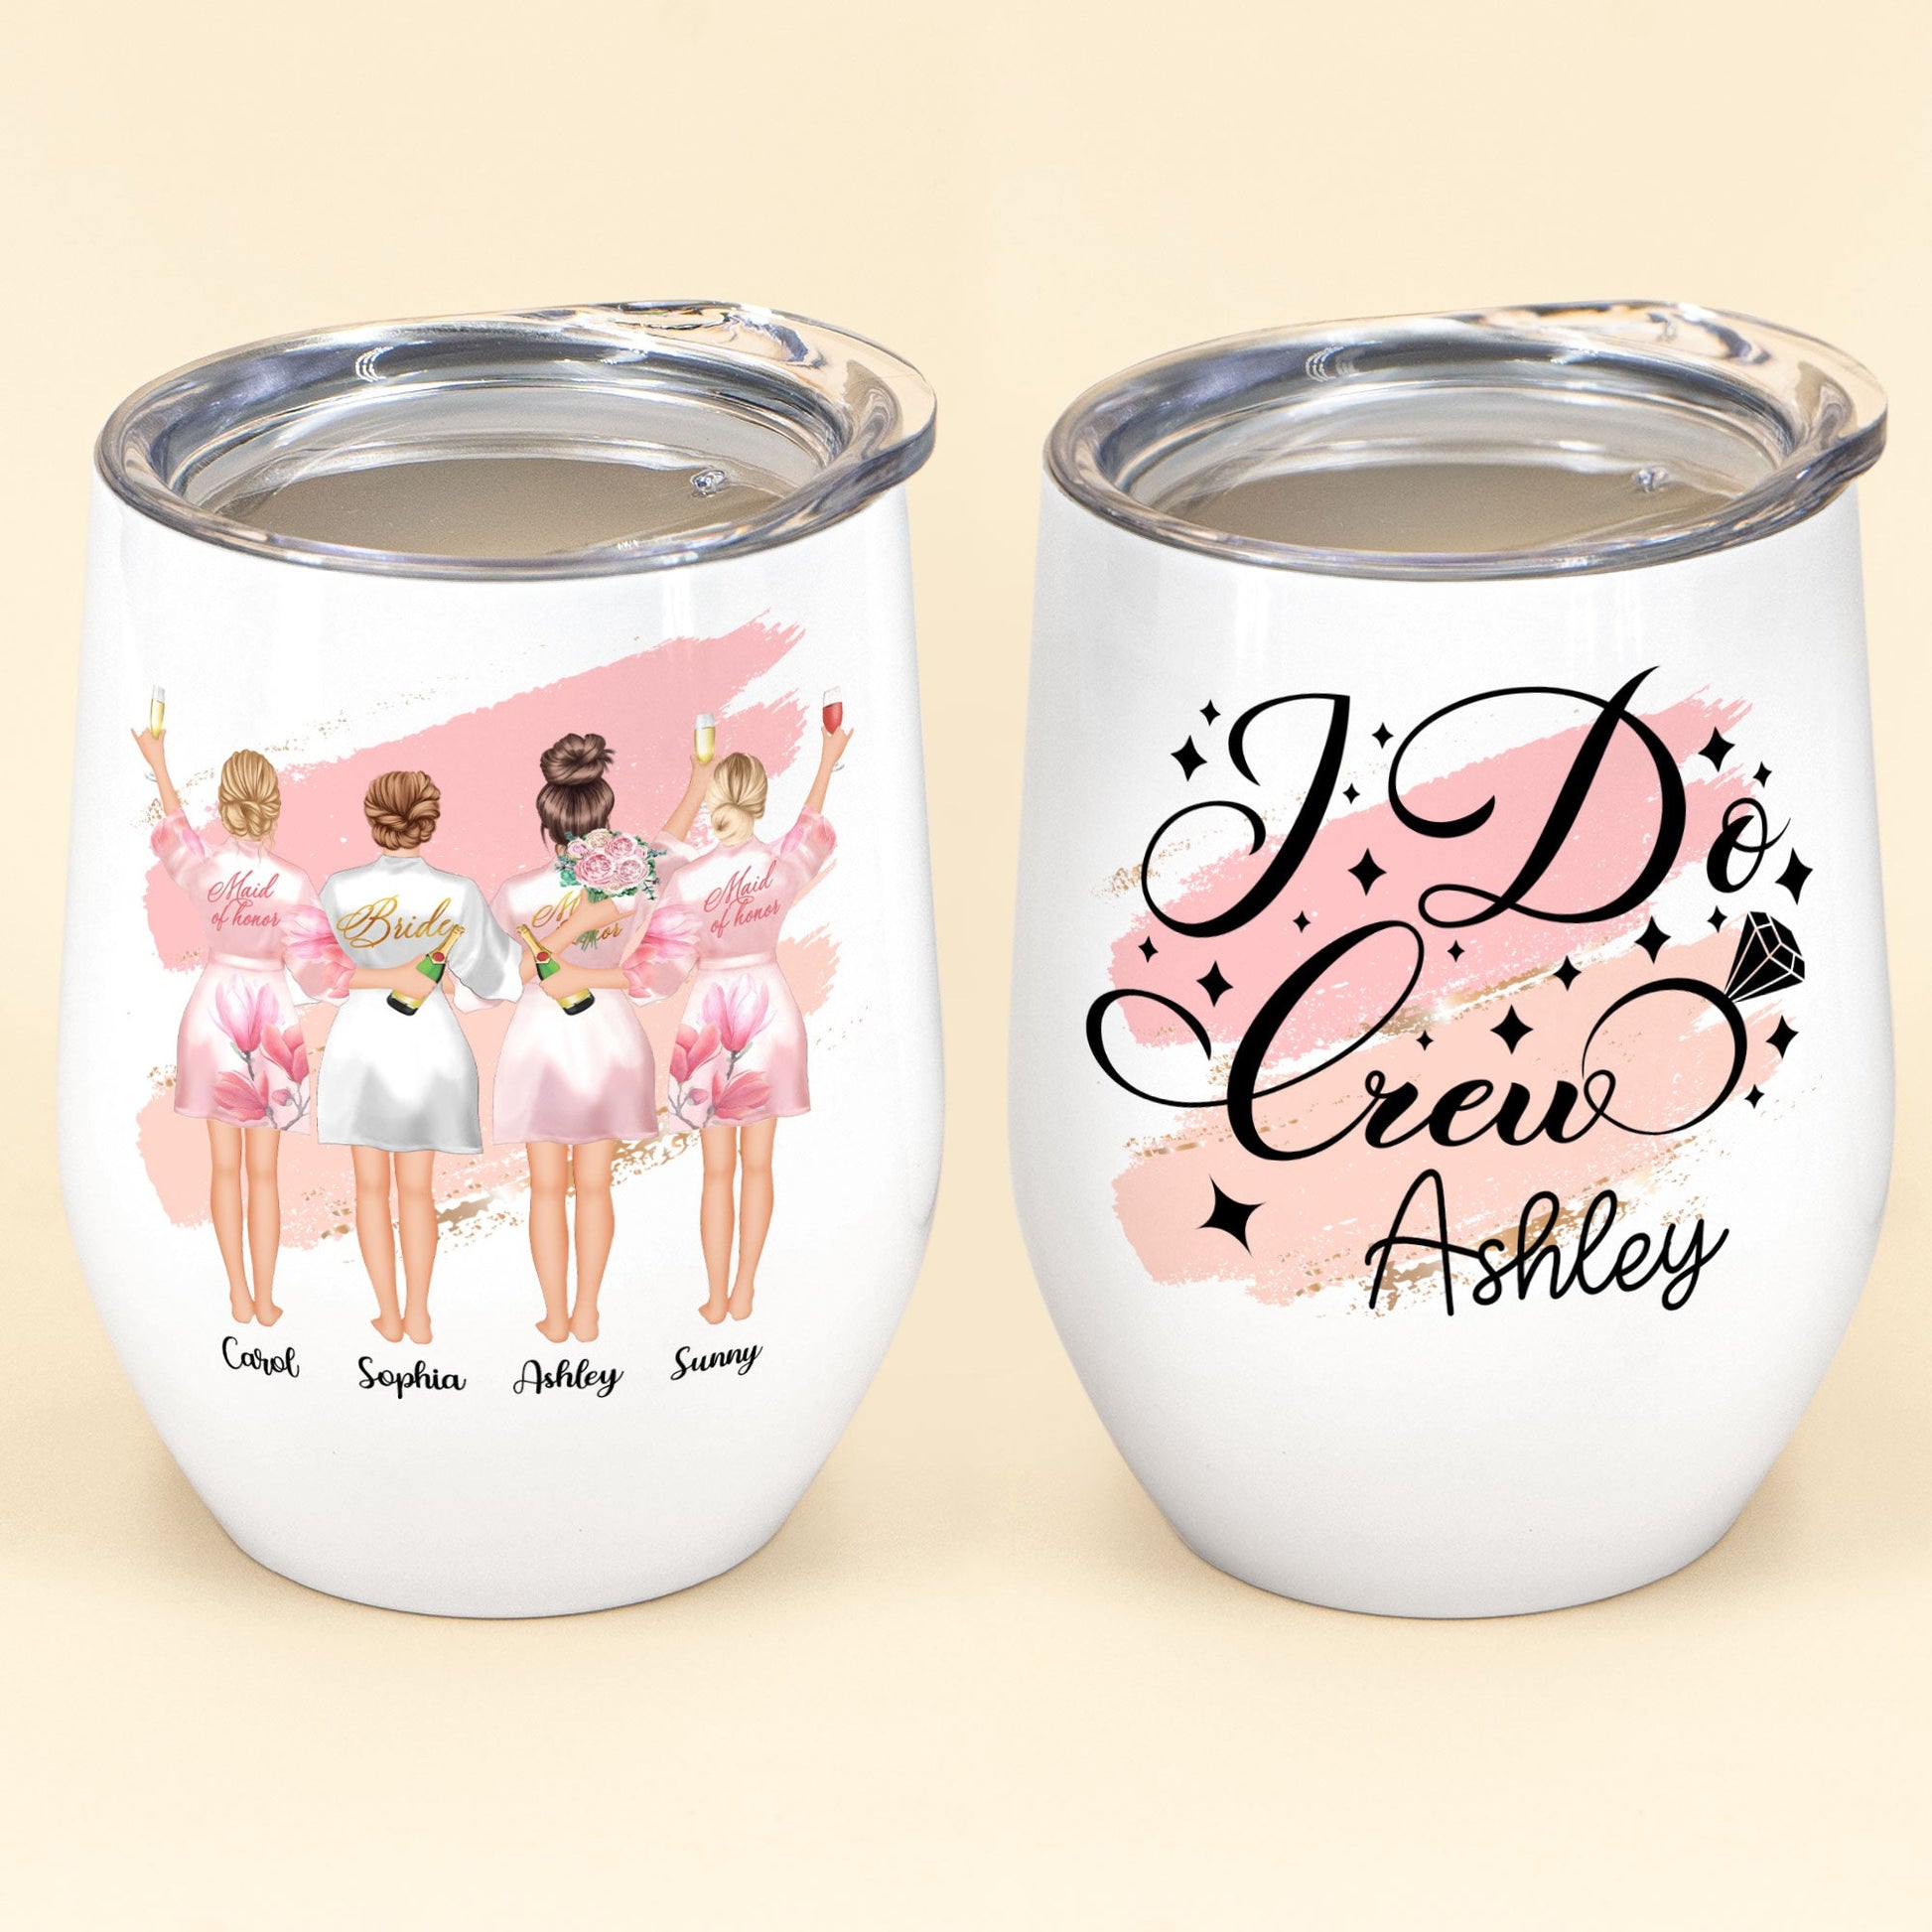 DIY Etched Mason Jar Drinking Glasses. These were made for a bachelorette  party. Many fun possibilities!